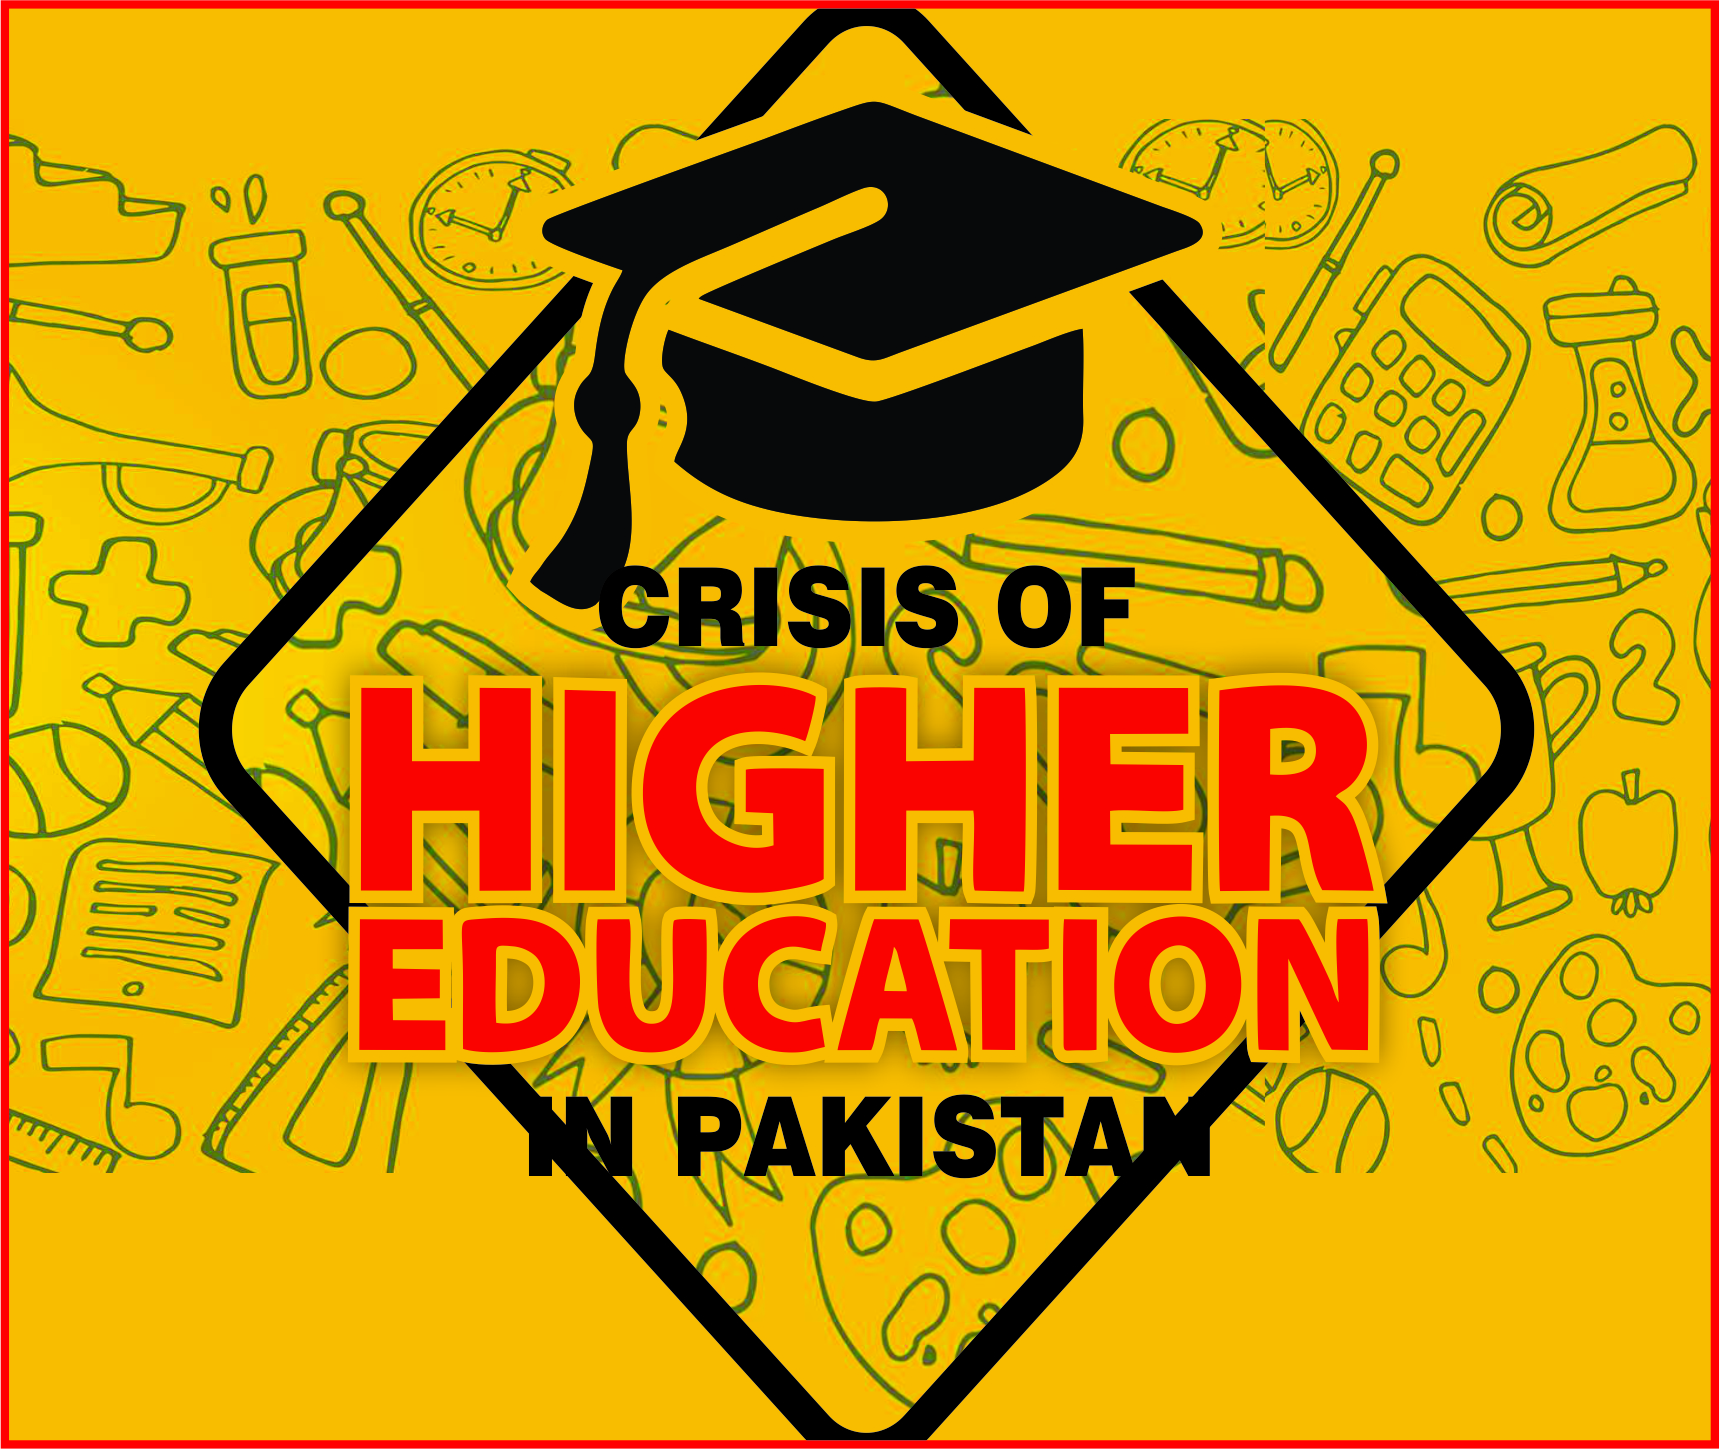 You are currently viewing Crisis of Higher Education in Pakistan